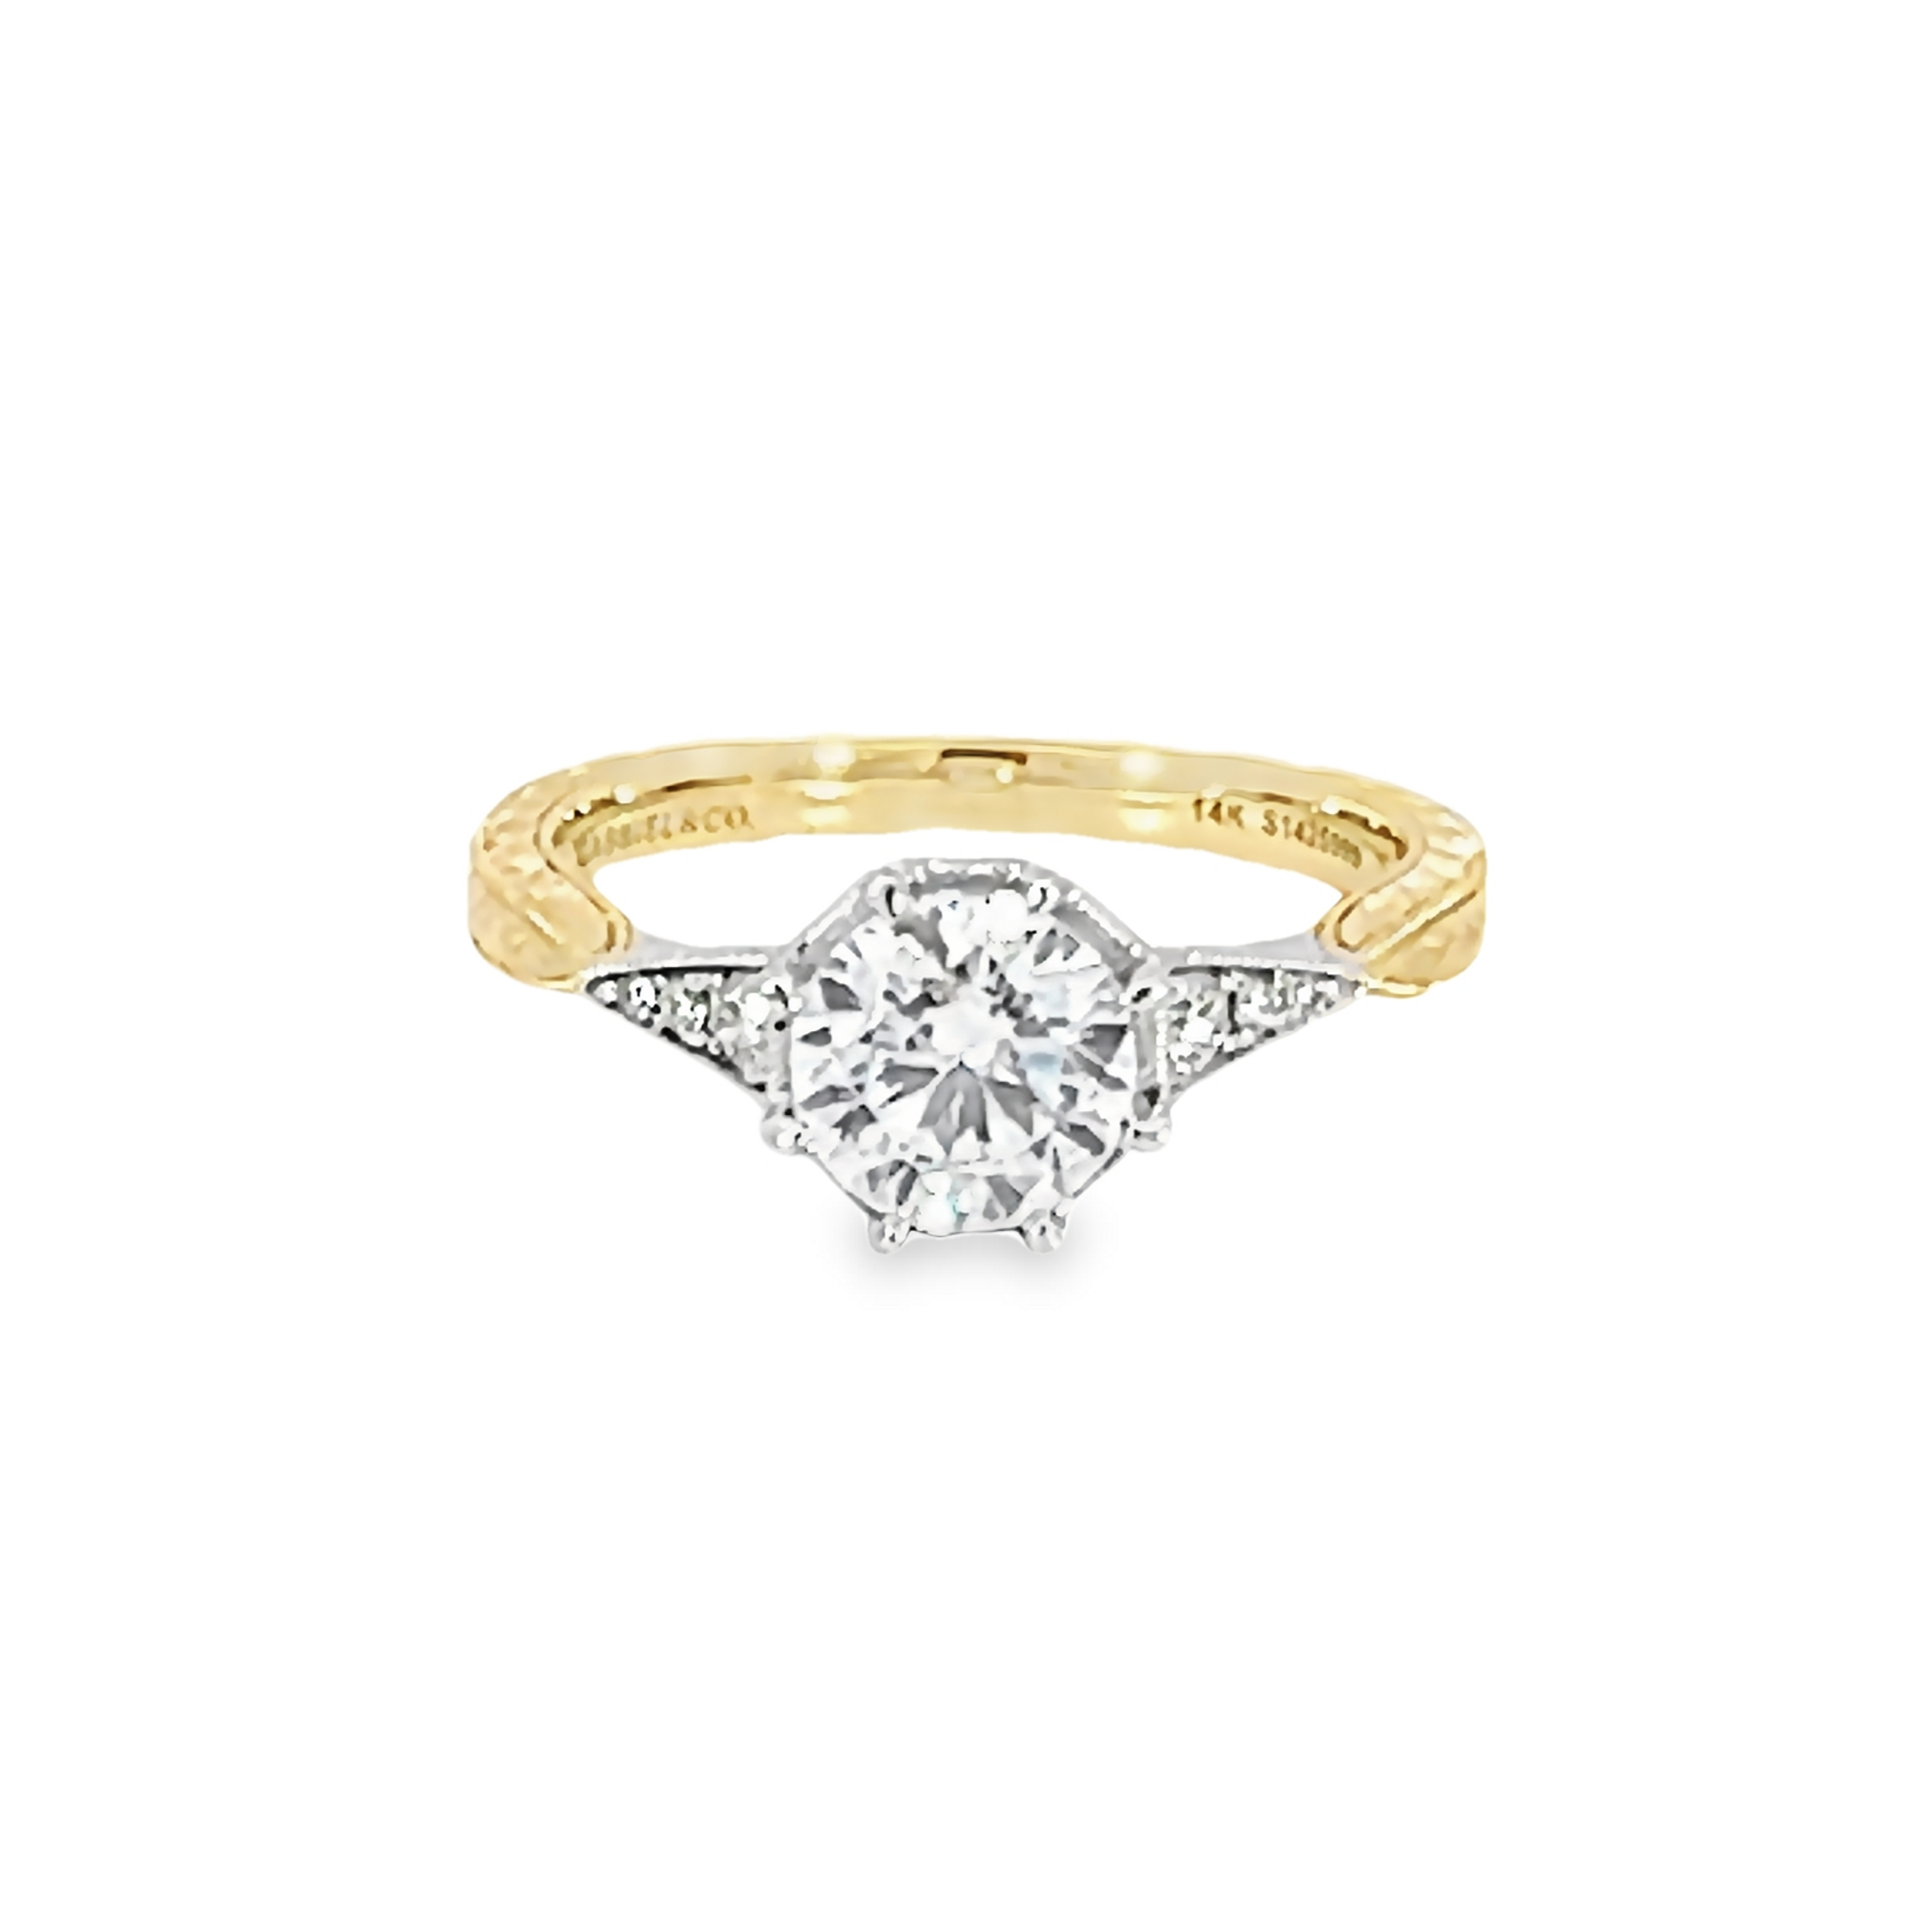 14k Yellow Gold Vintage Inspired Engagement Ring